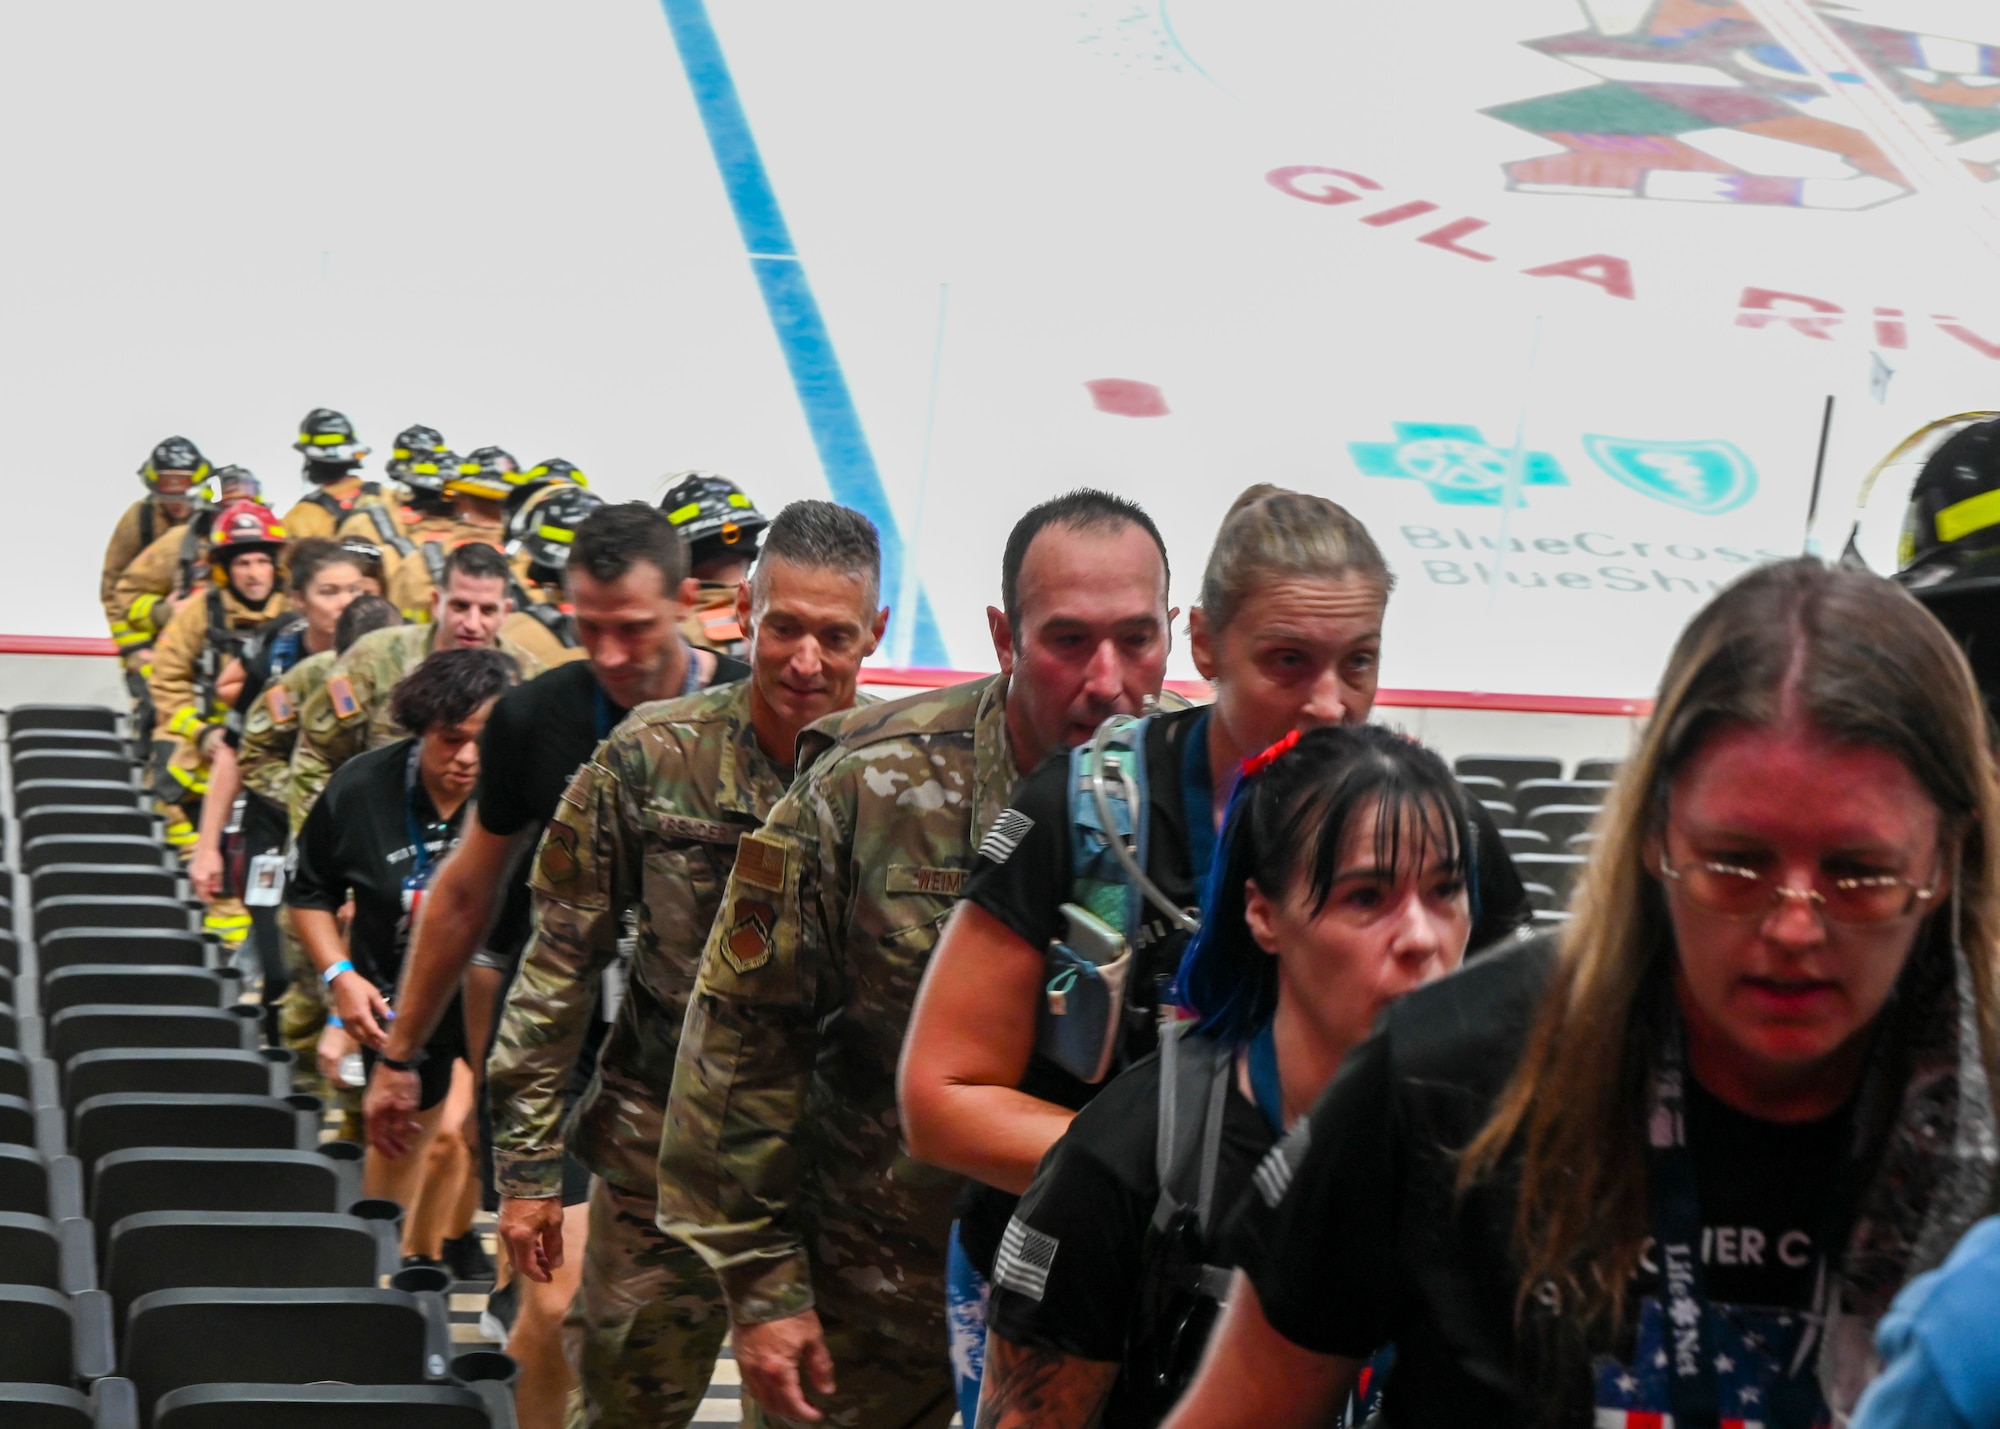 Brig. Gen. Gregory Kreuder, 56th Fighter Wing commander (left in Operational Camouflage Pattern uniform), and Chief Master Sgt. Daniel Weimer (right in OCP uniform), 56th Fighter Wing command chief, climb steps in the 9/11 Tower Challenge at Gila River Arena Sept. 7, 2021, in Glendale, Arizona.